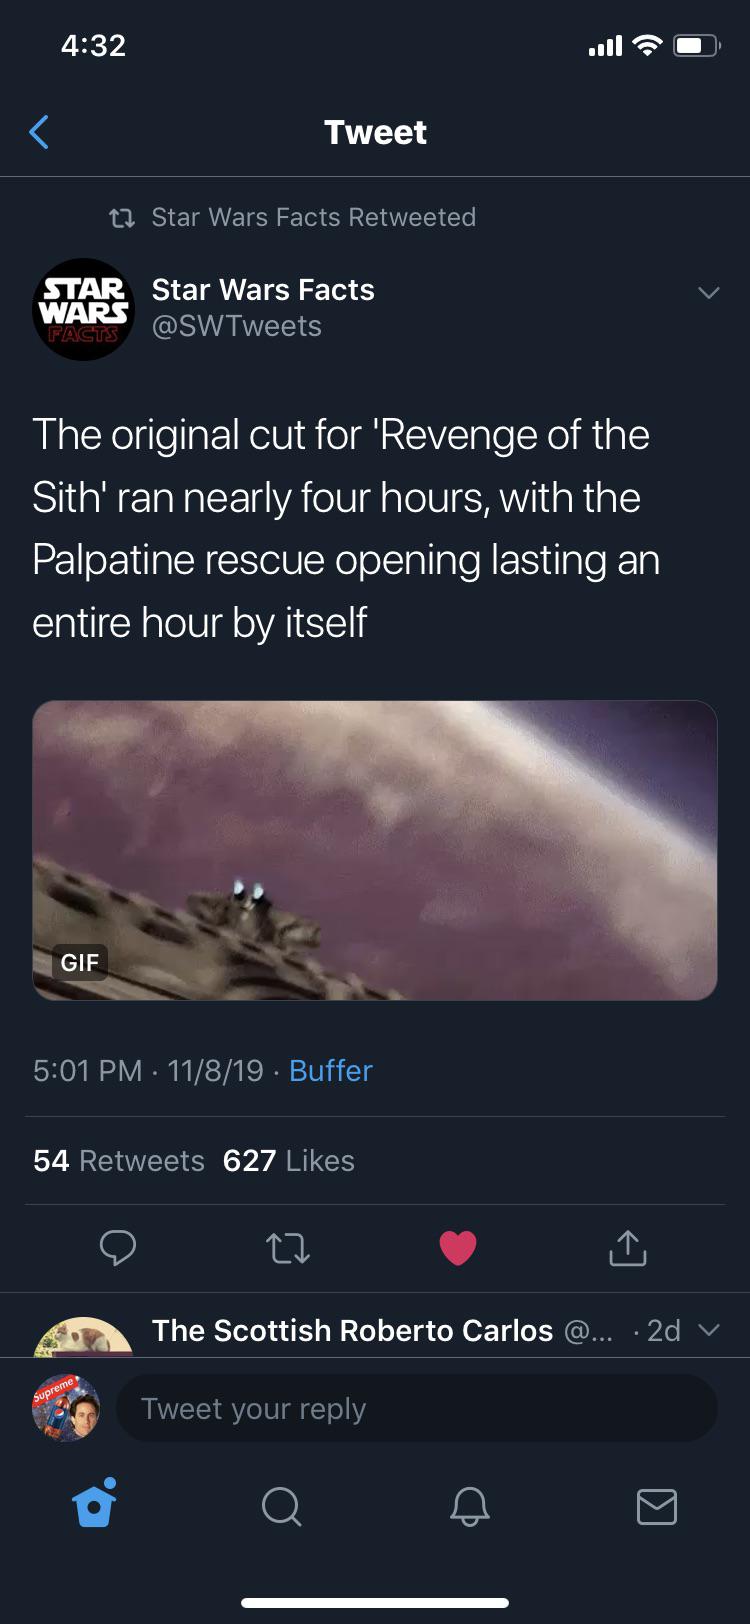 prequel-memes star-wars-memes prequel-memes text: 4:32 Tweet to Star Wars Facts Retweeted STAR star Wars Facts @SWTweets The original cut for Revenge of the Sithl ran nearly four hours, with the Palpatine rescue opening lasting an entire hour by itself GIF 5:01 PM • 11/8/19 • Buffer 627 Likes 54 Retweets The Scottish Roberto Carlos Tweet your reply 